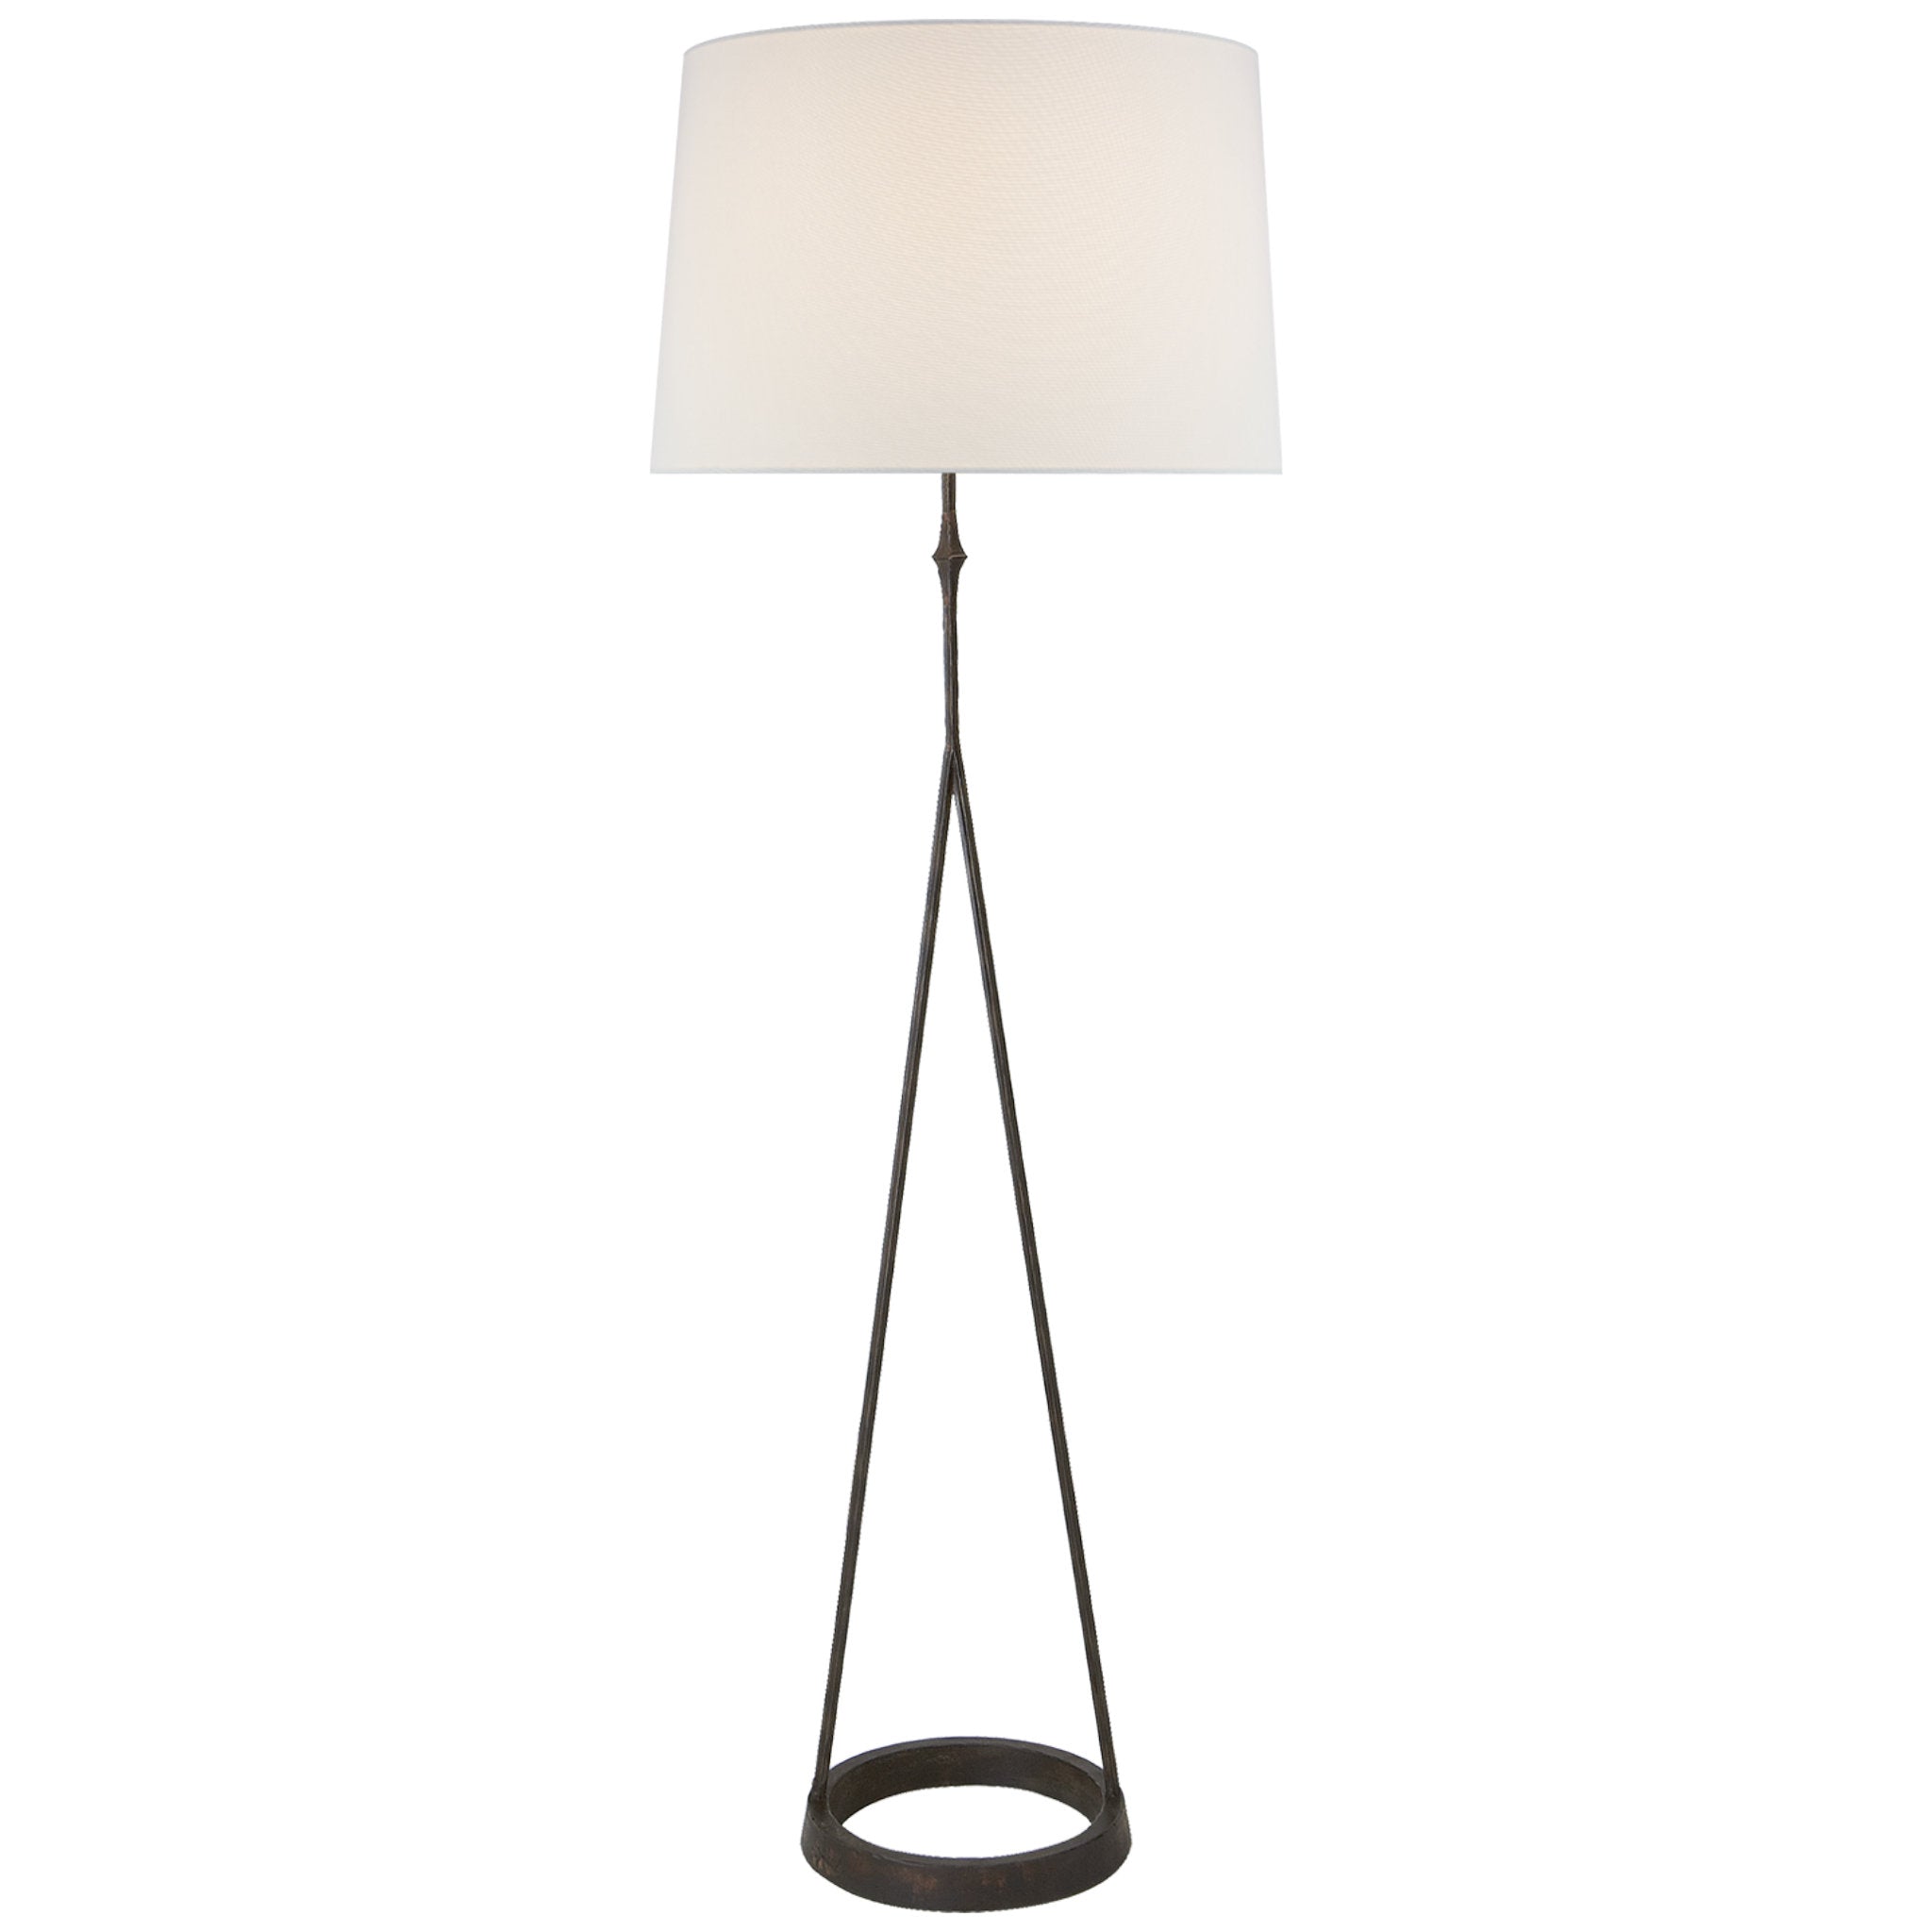 Visual Comfort Dauphine Floor Lamp in Aged Iron with Linen Shade